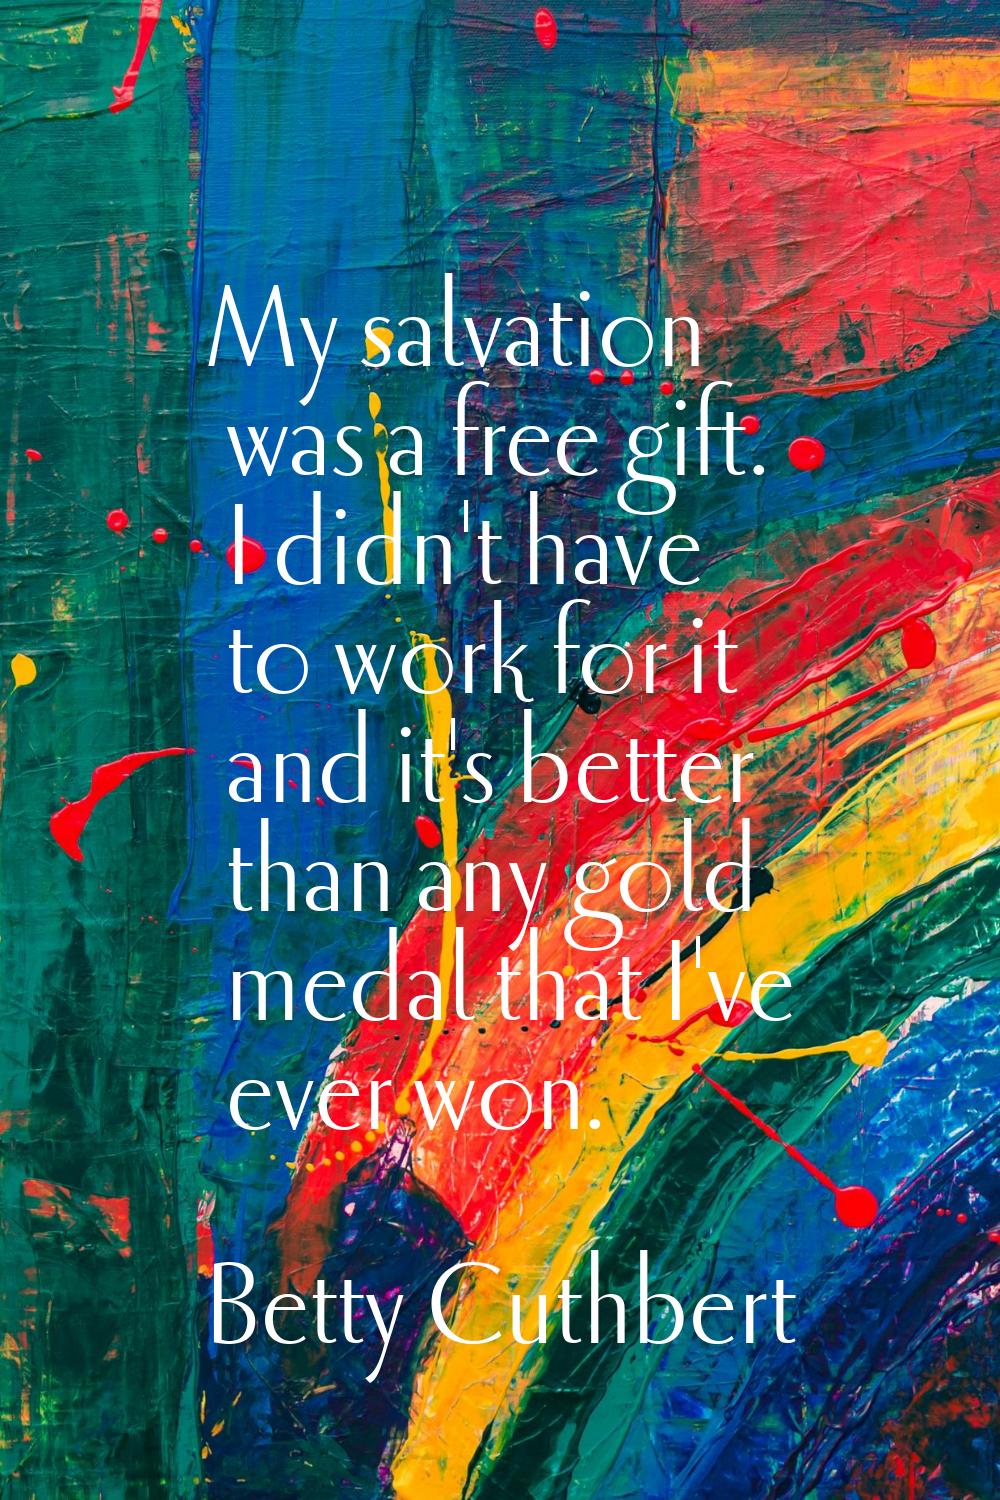 My salvation was a free gift. I didn't have to work for it and it's better than any gold medal that